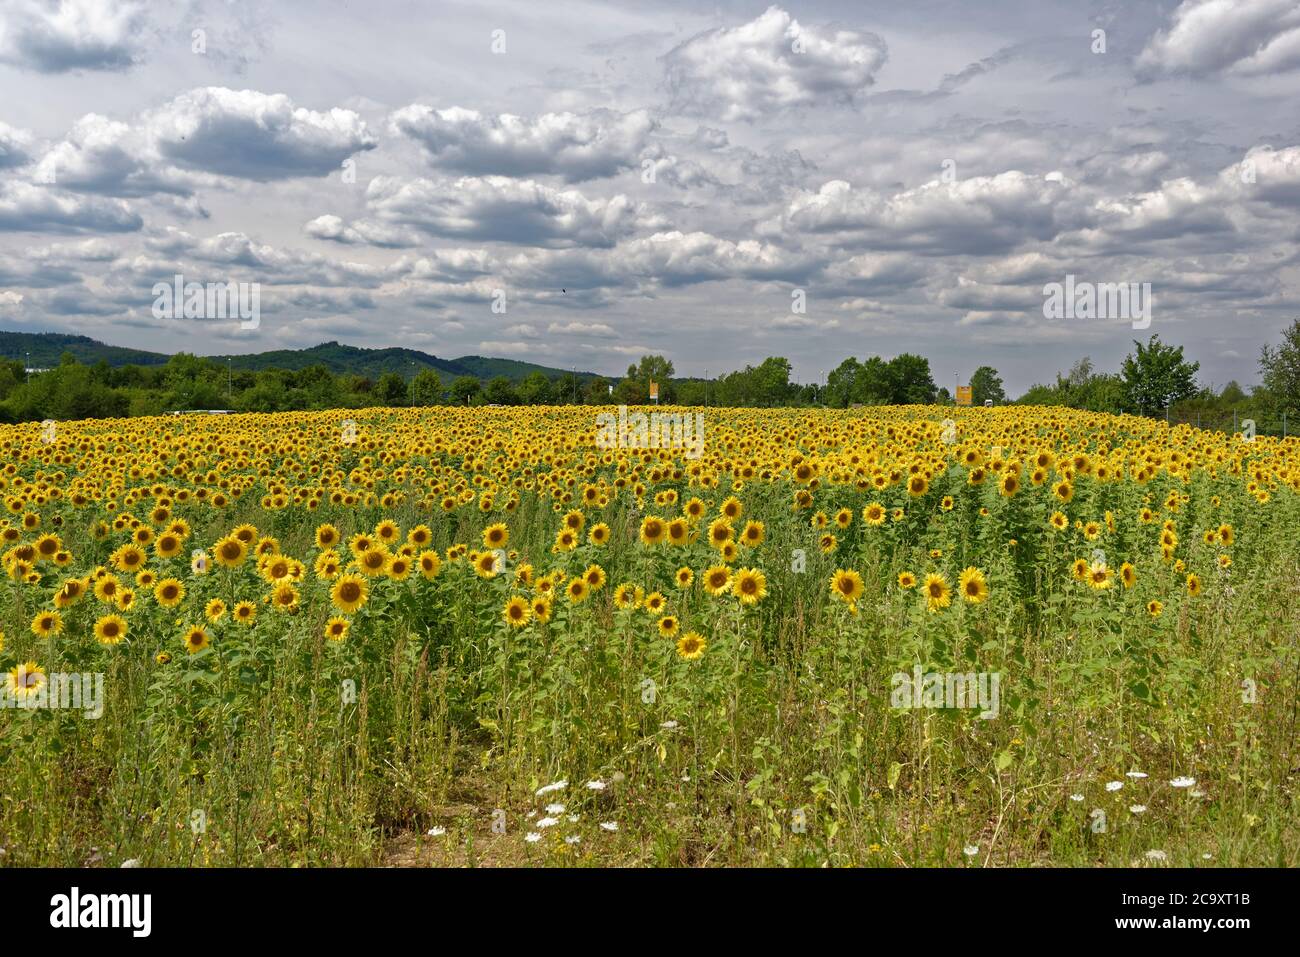 Sunflowers on a field Stock Photo